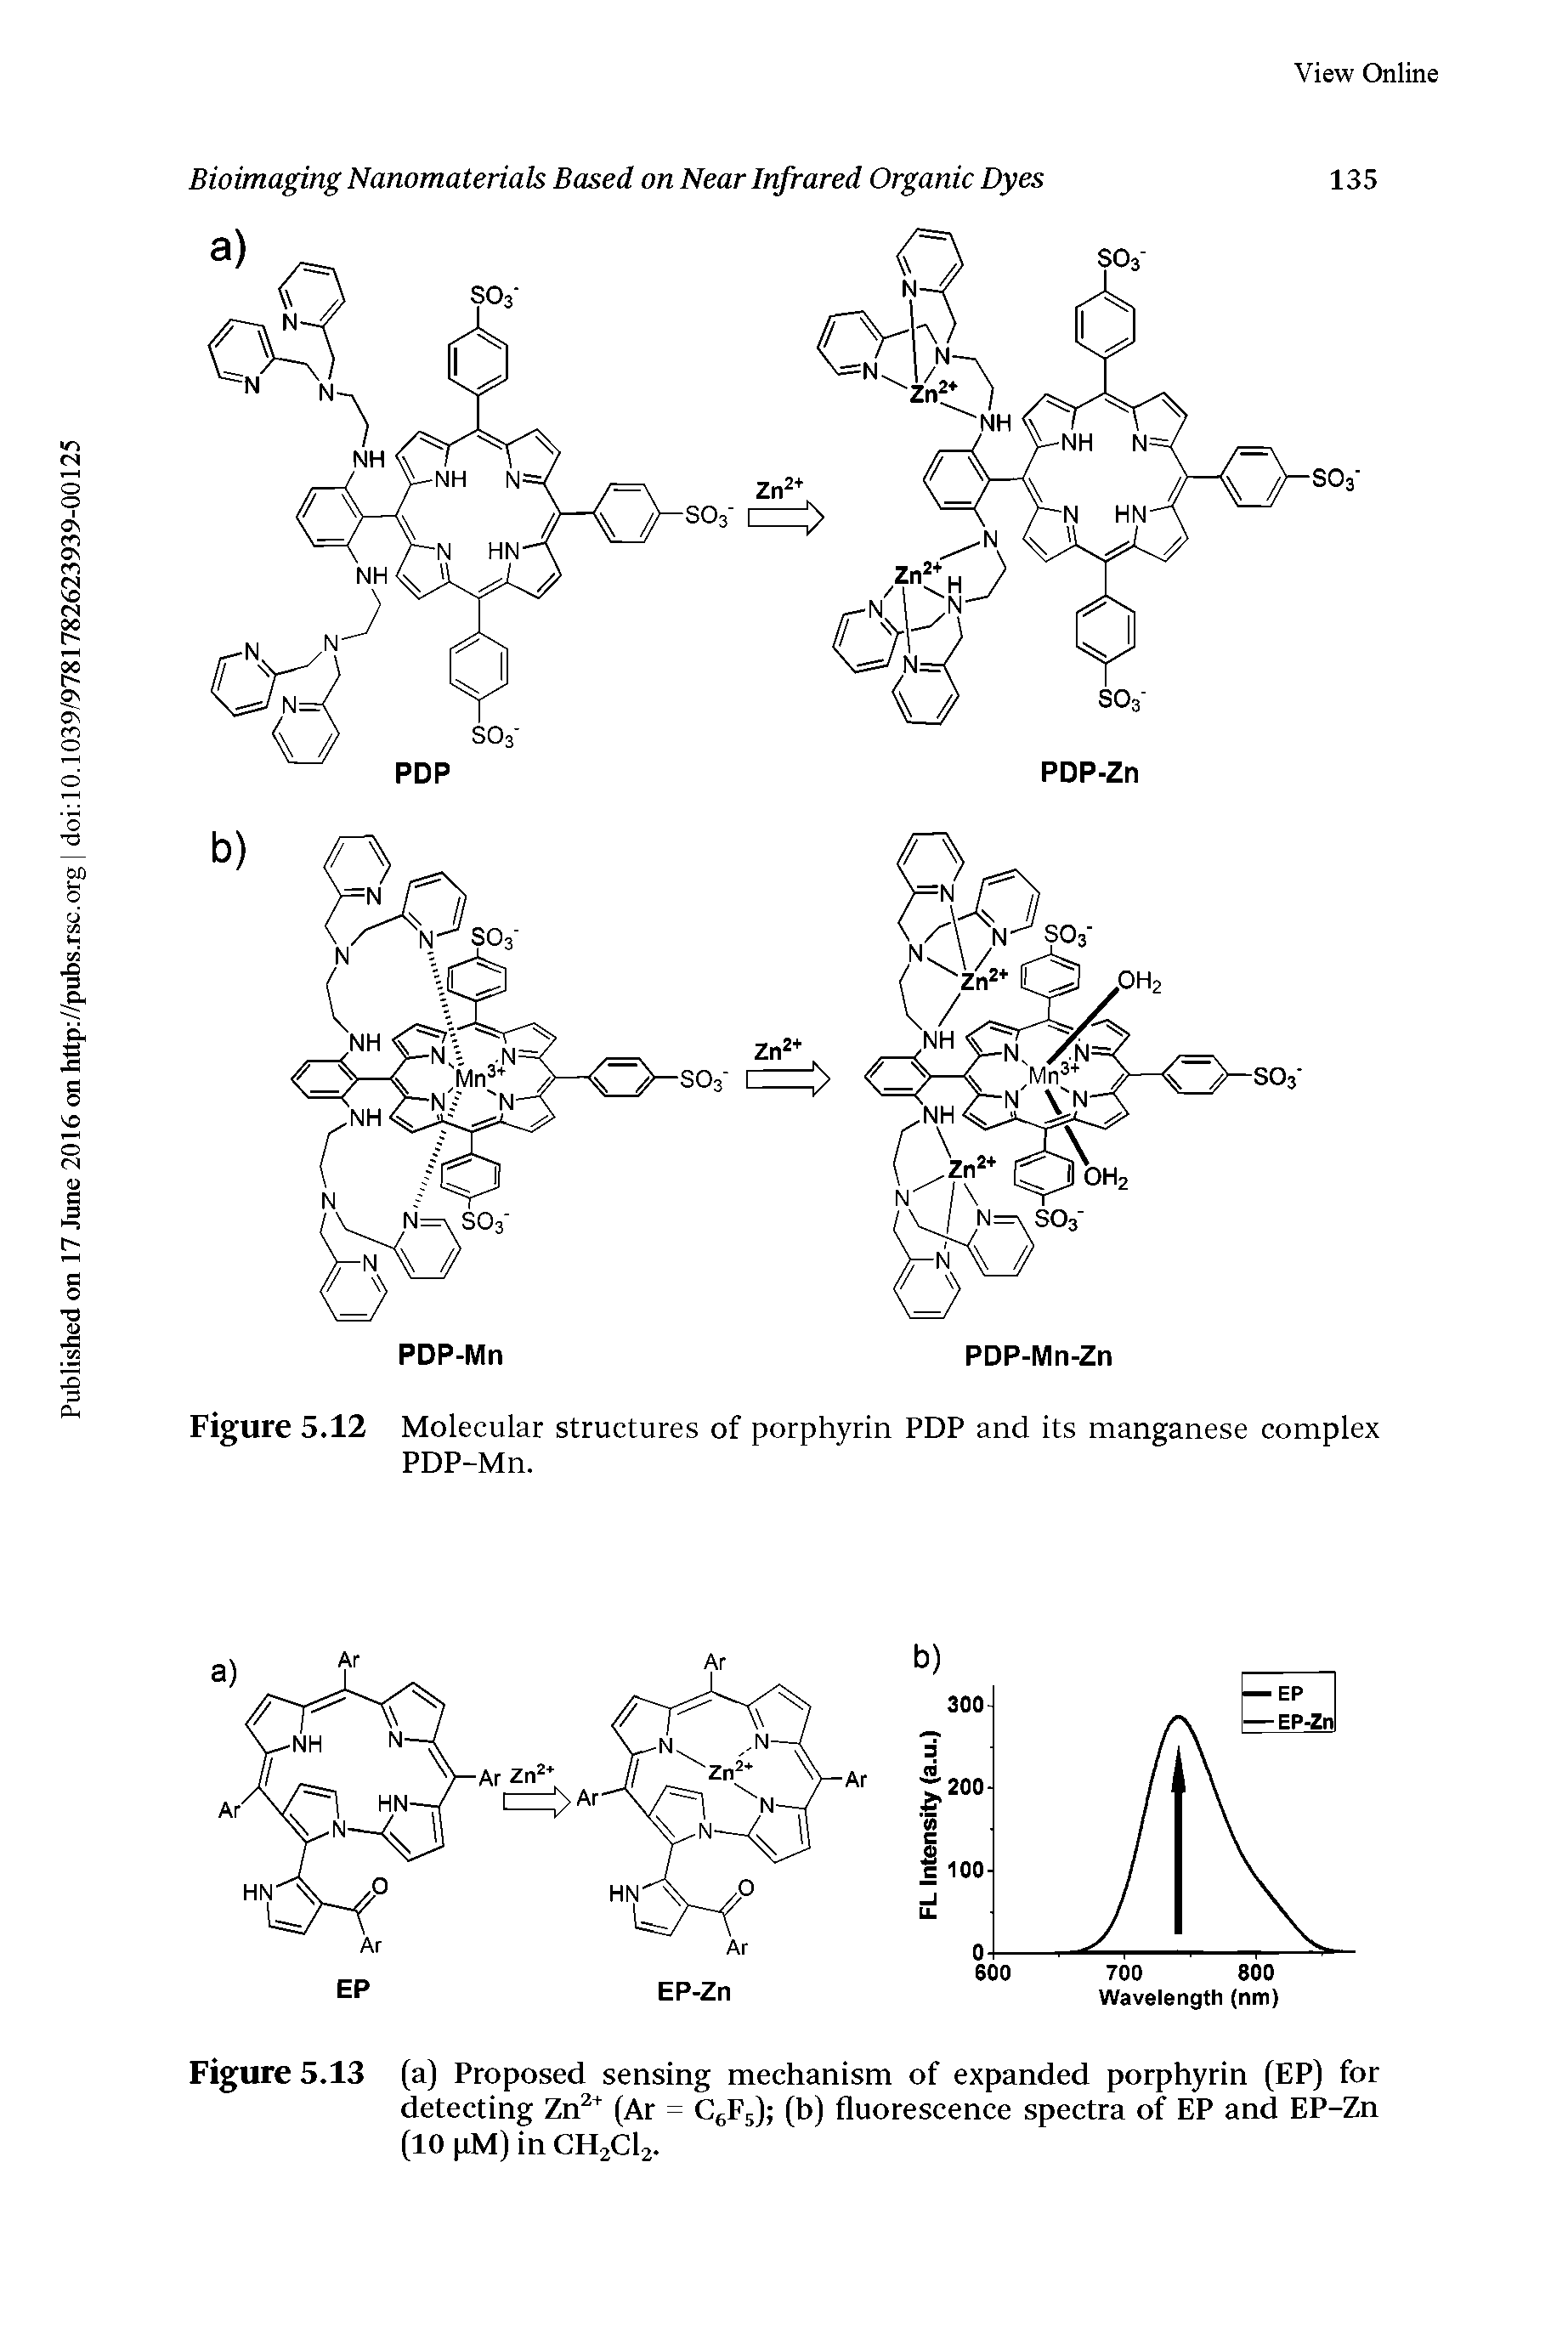 Figure 5.12 Molecular structures of porphyrin PDF and its manganese complex PDP-Mn.